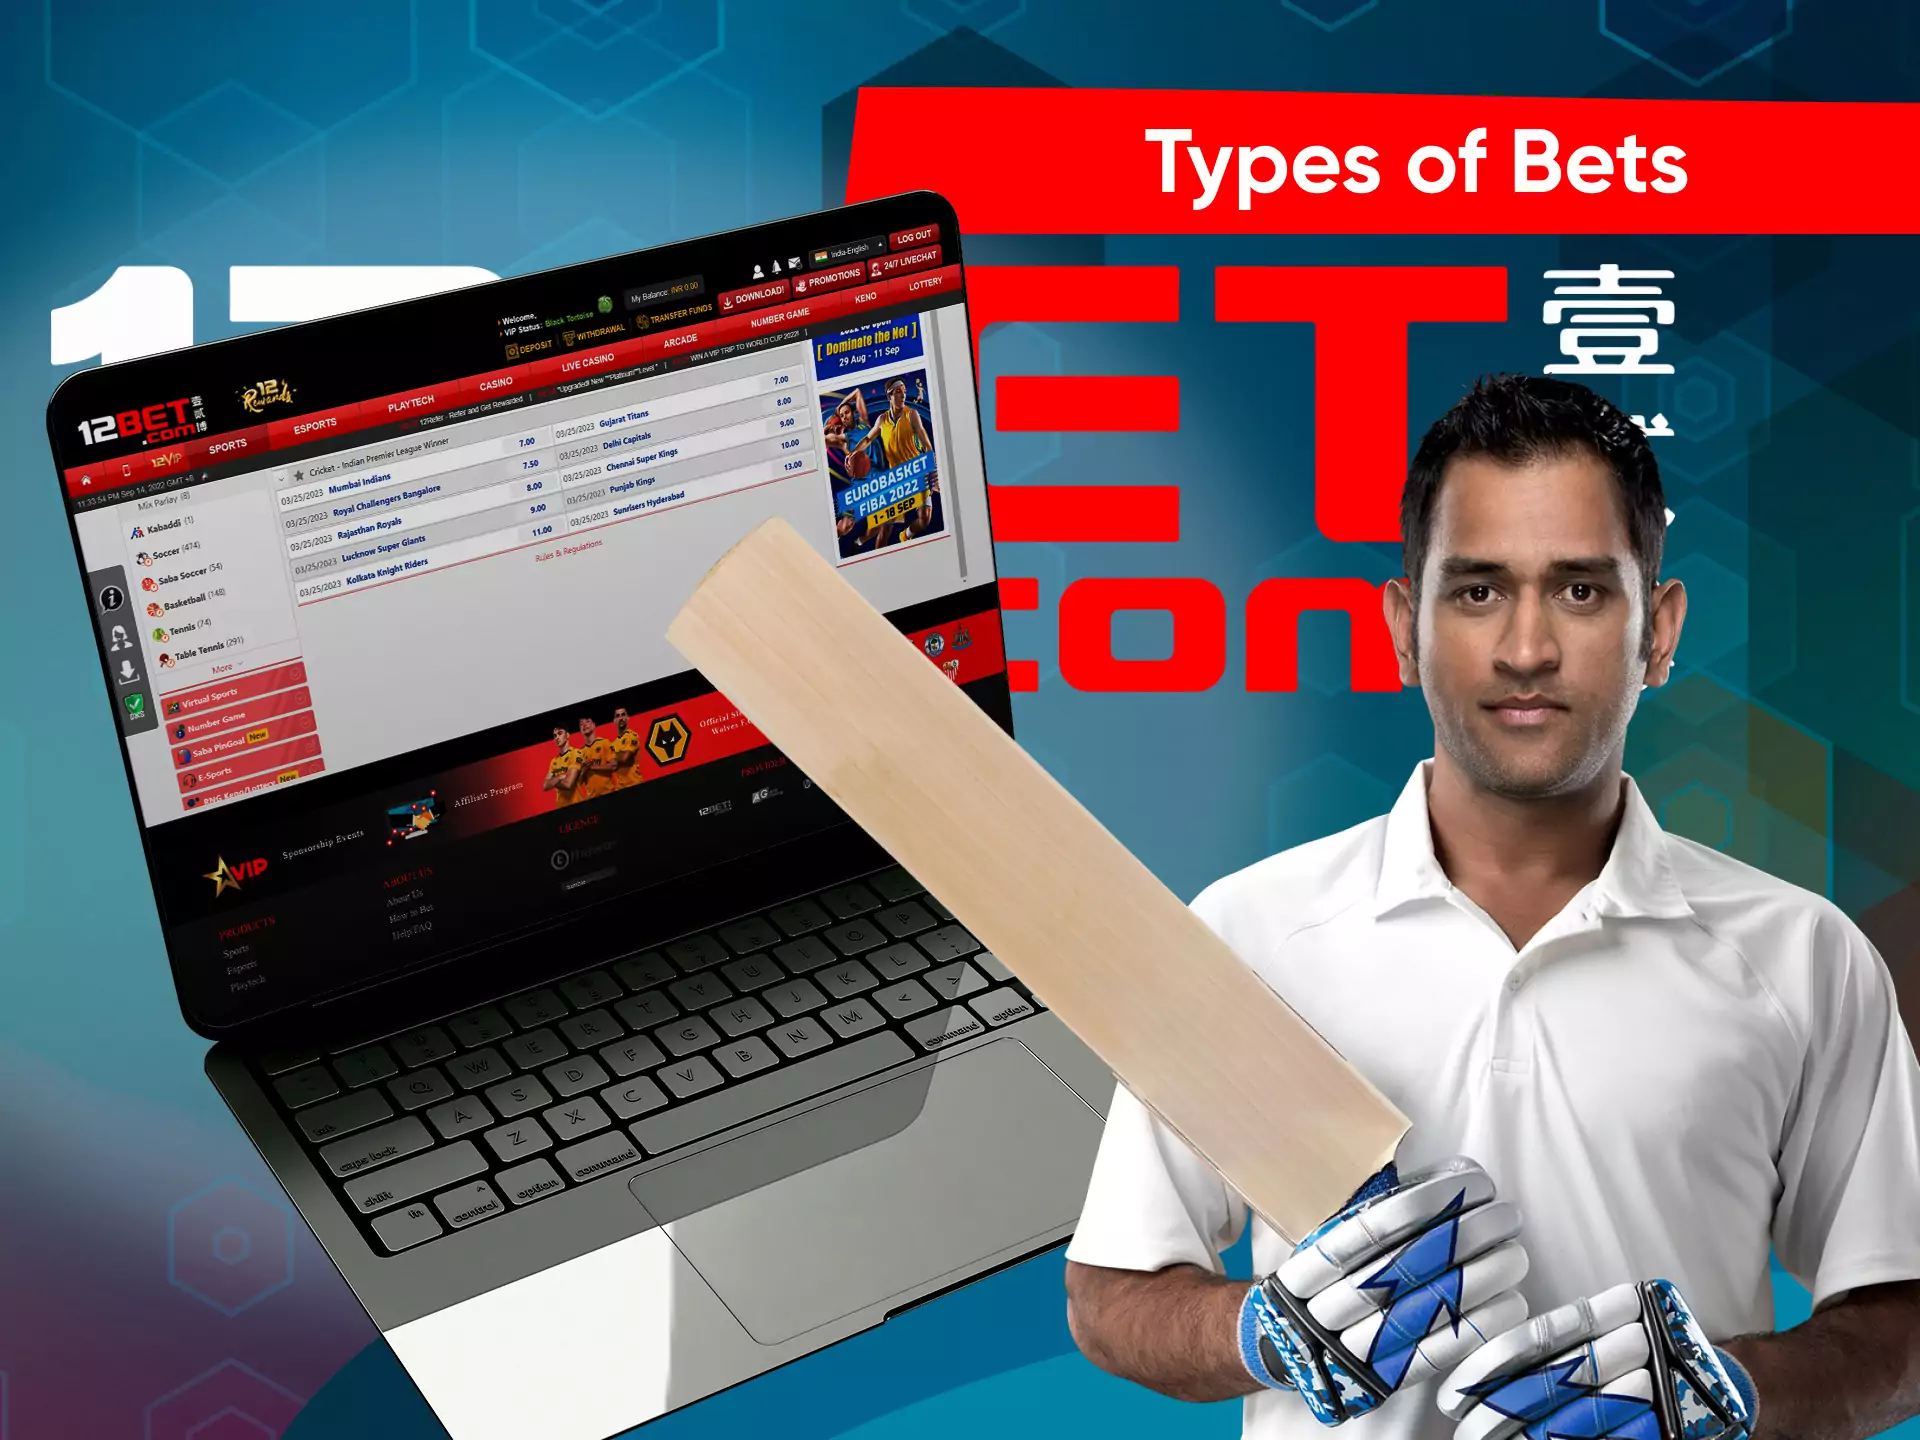 On 12bet, you can combine different types of bets.